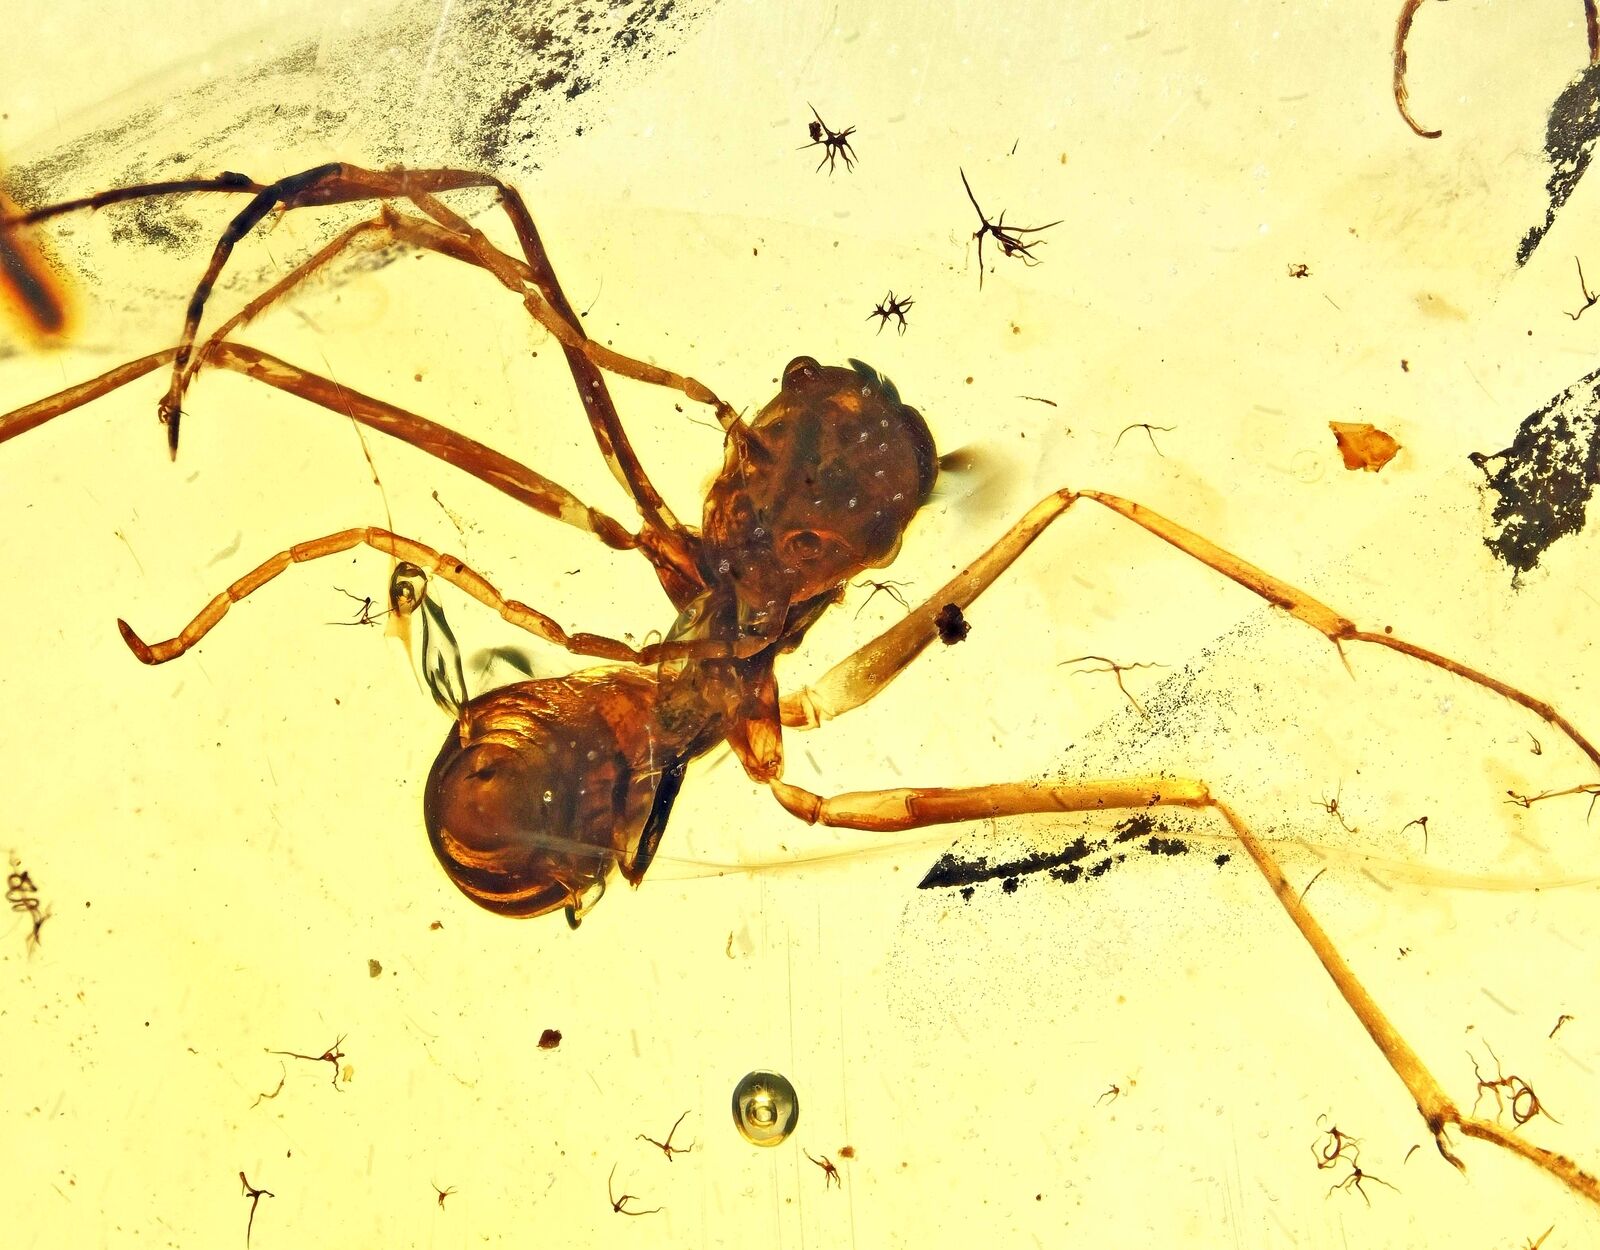 Extinct Large Ant with stinger Fossil inclusion in Burmese Amber